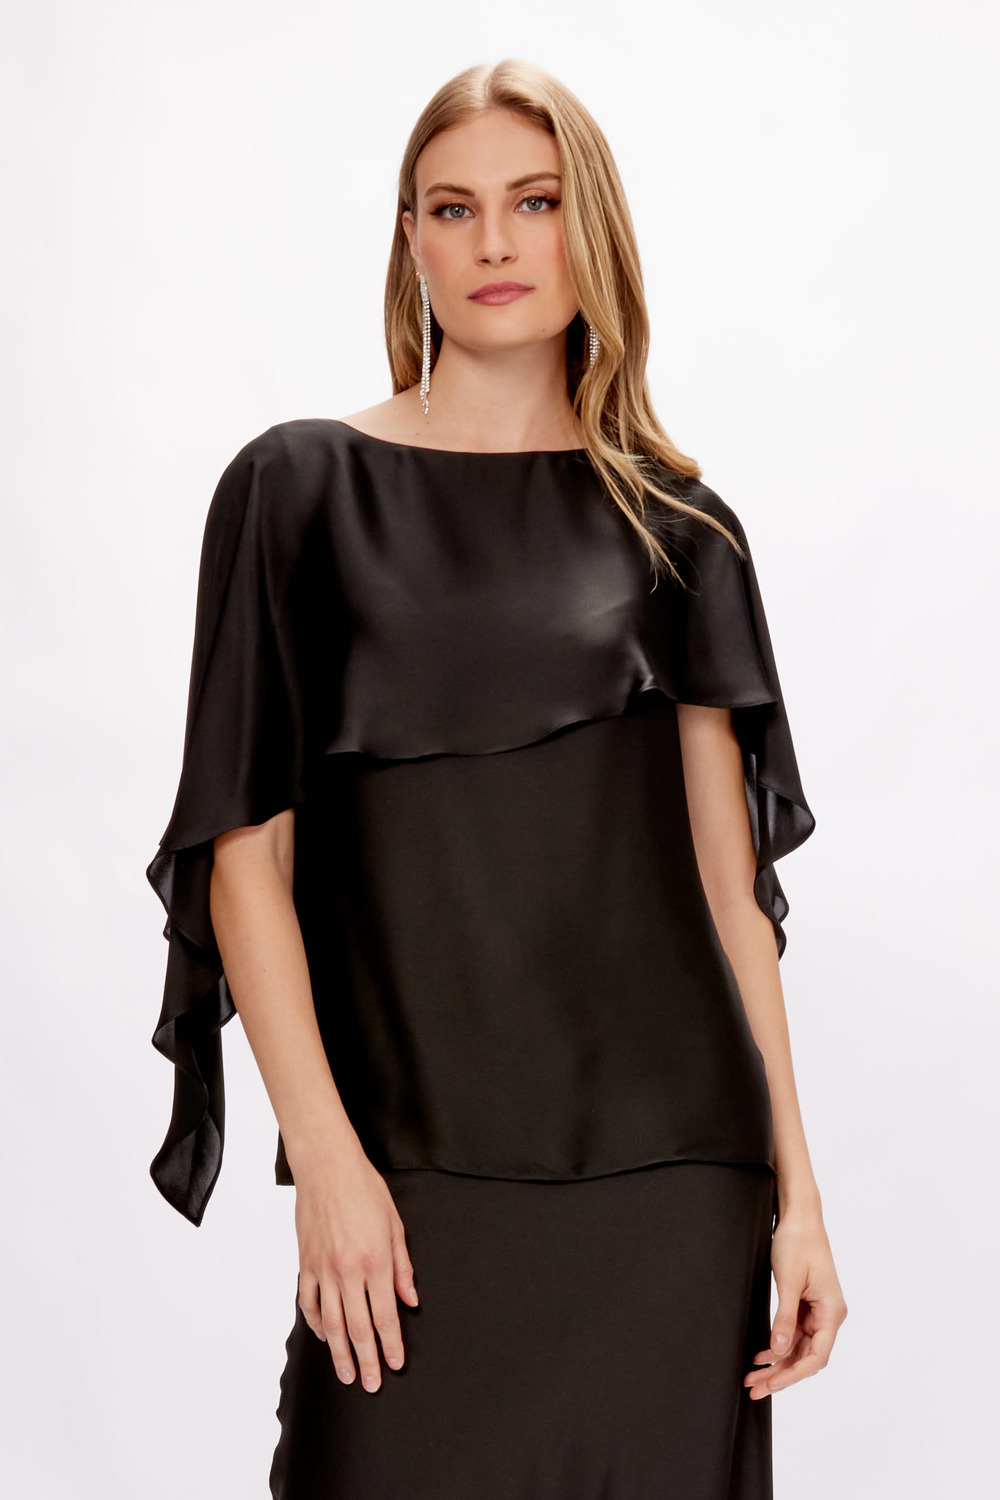 Silky Layered Top Style 234023. Black